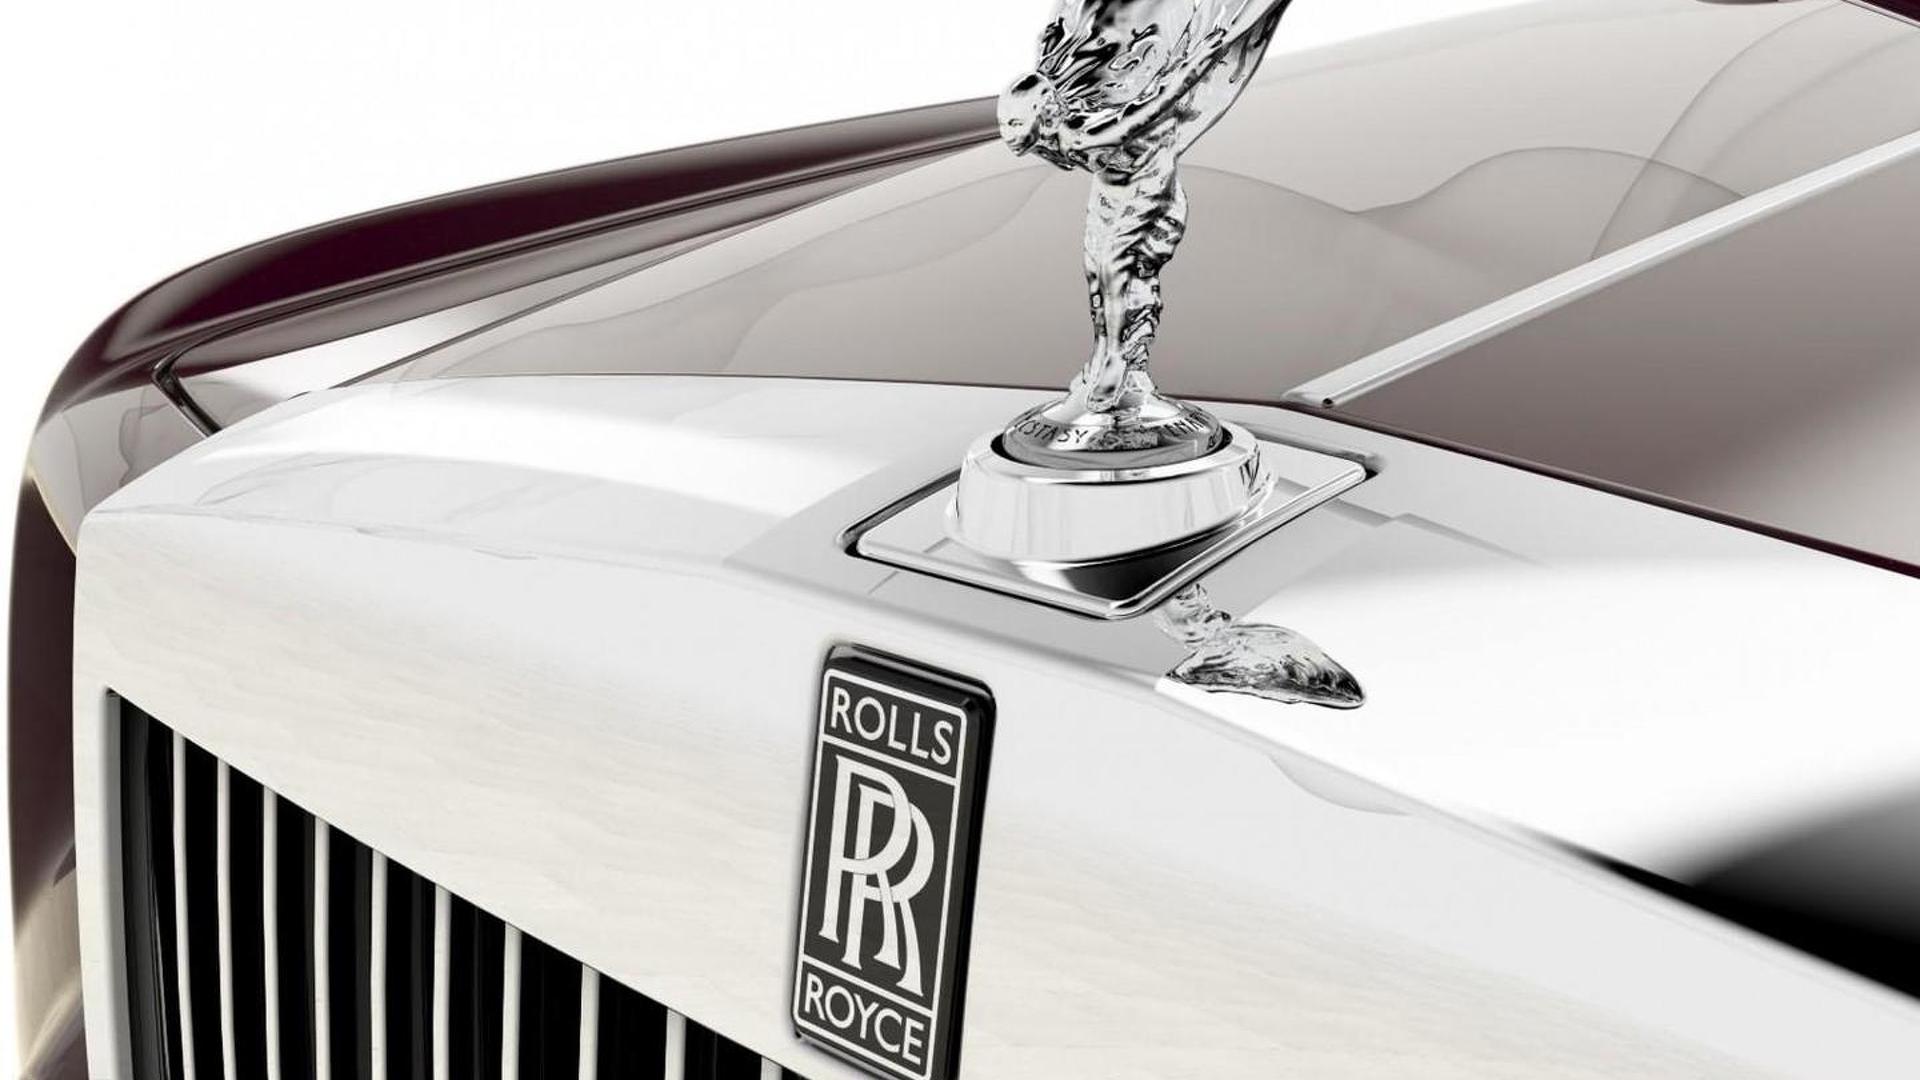 Did You Know The Seamy Past Of The Rolls Royce Spirit Of Ecstacy?